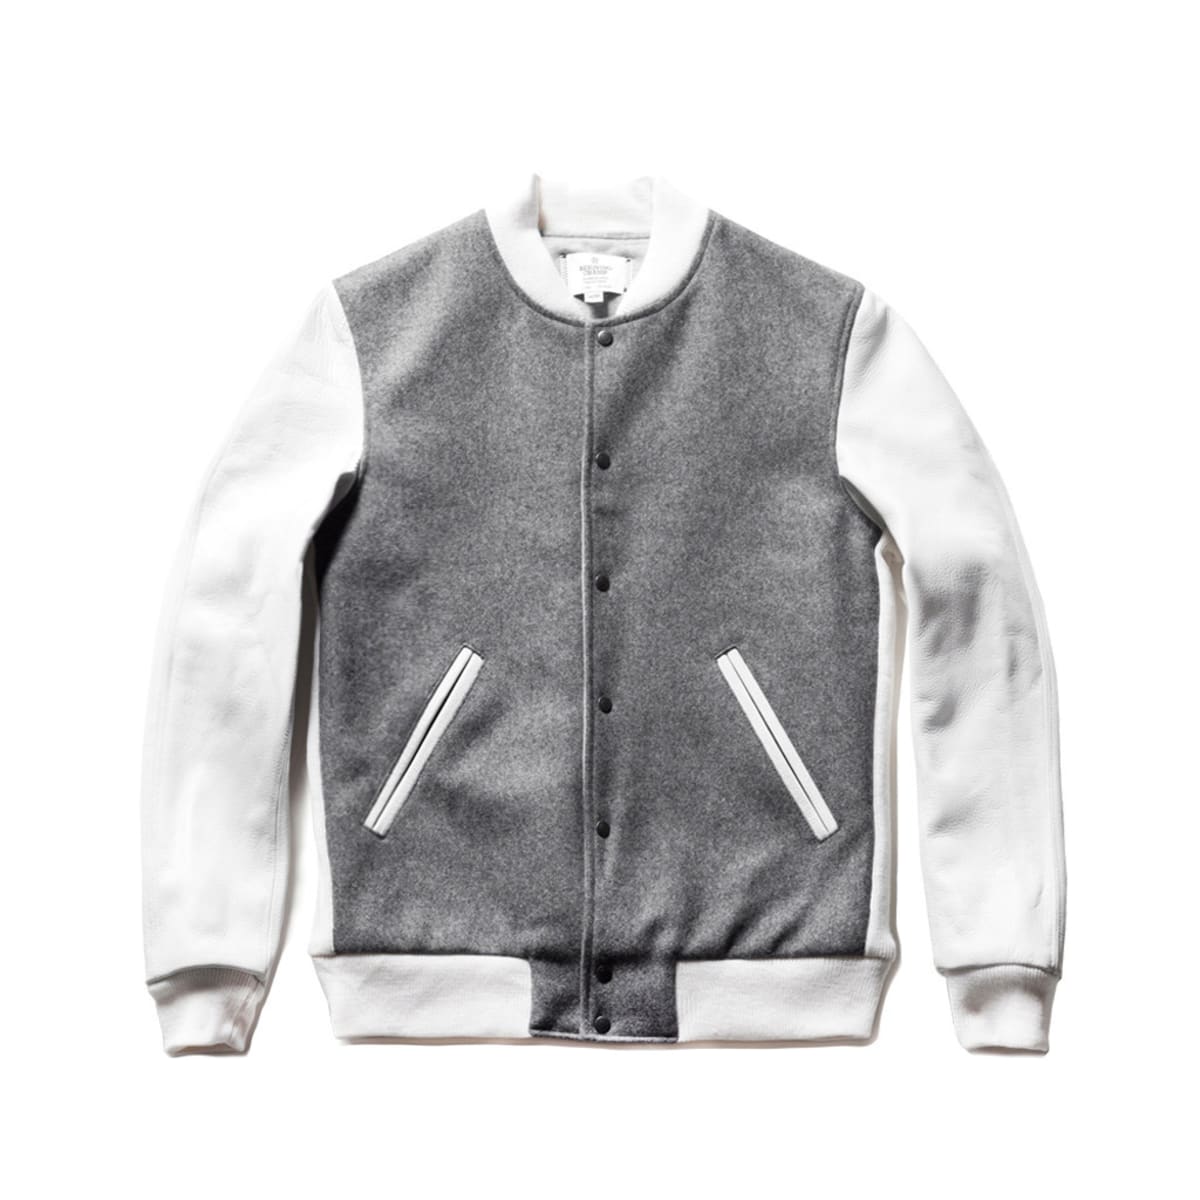 Reigning Champ's Melton Wool Varsity Jackets - Acquire